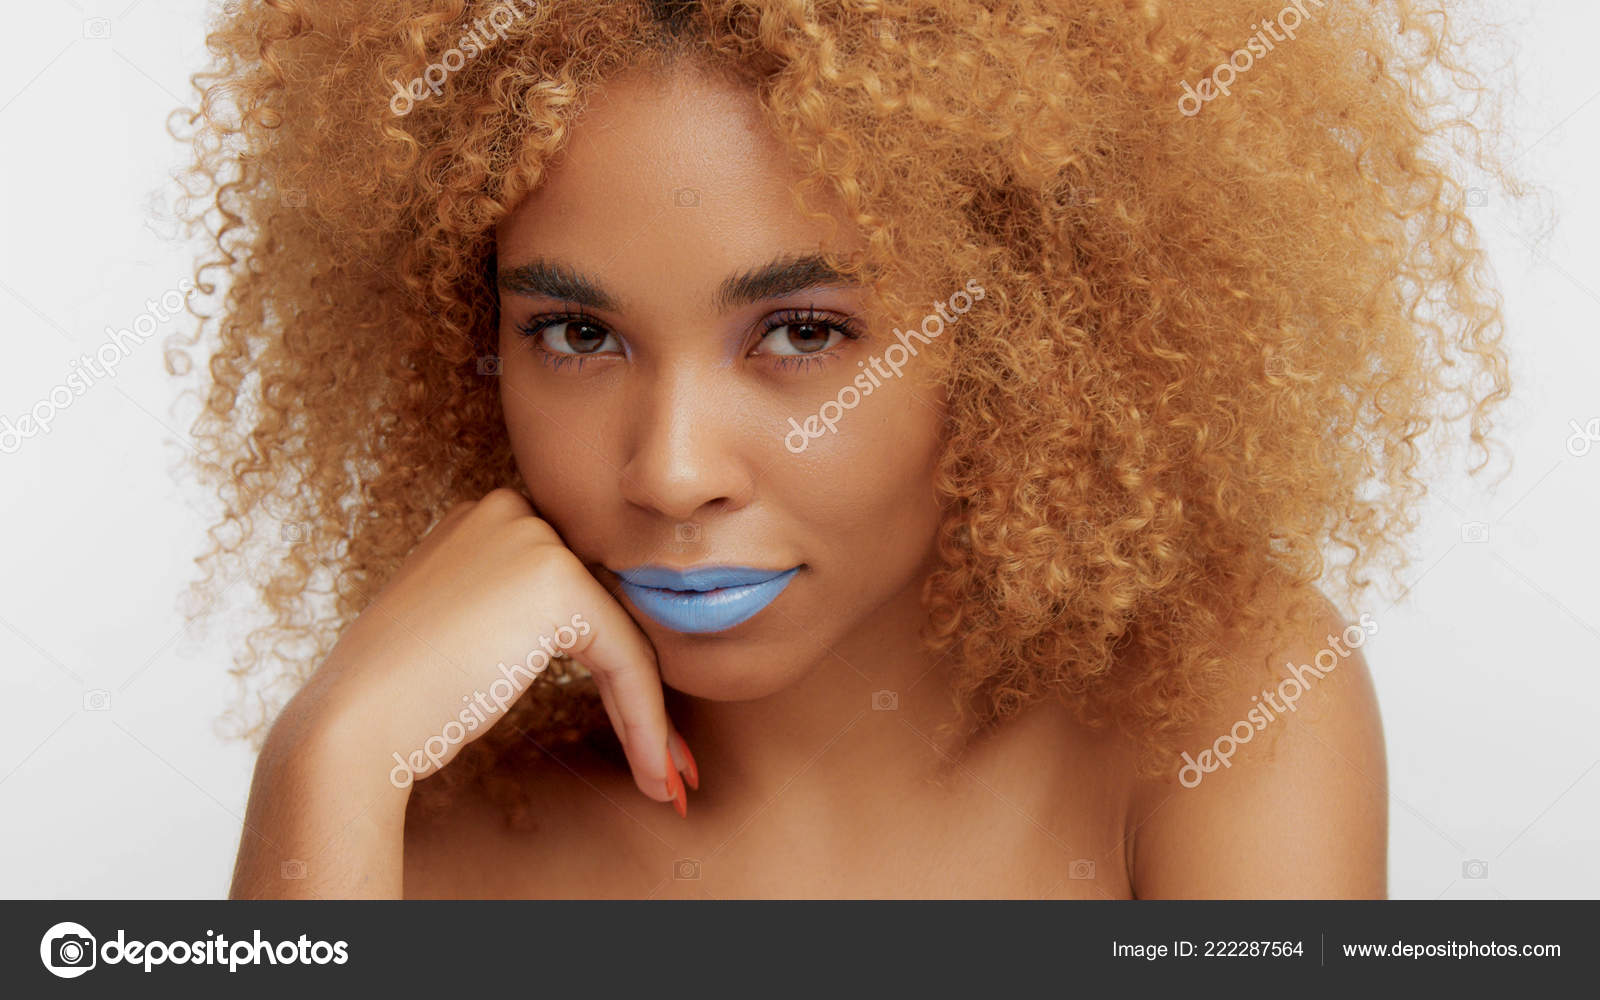 Mixed Race Black Blonde Model With Curly Hair Stock Photo